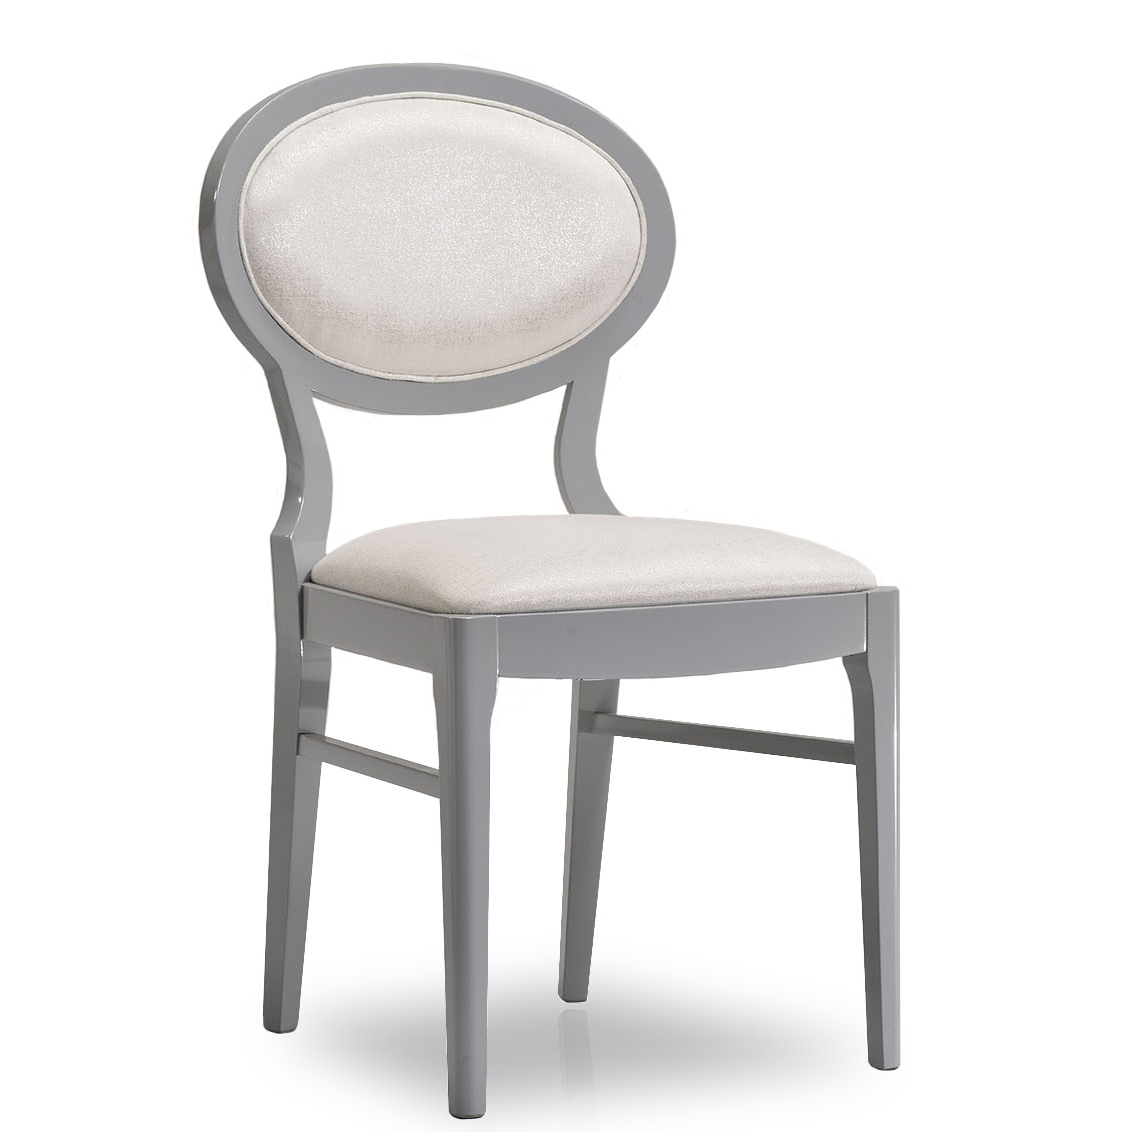 Grey and cream chair